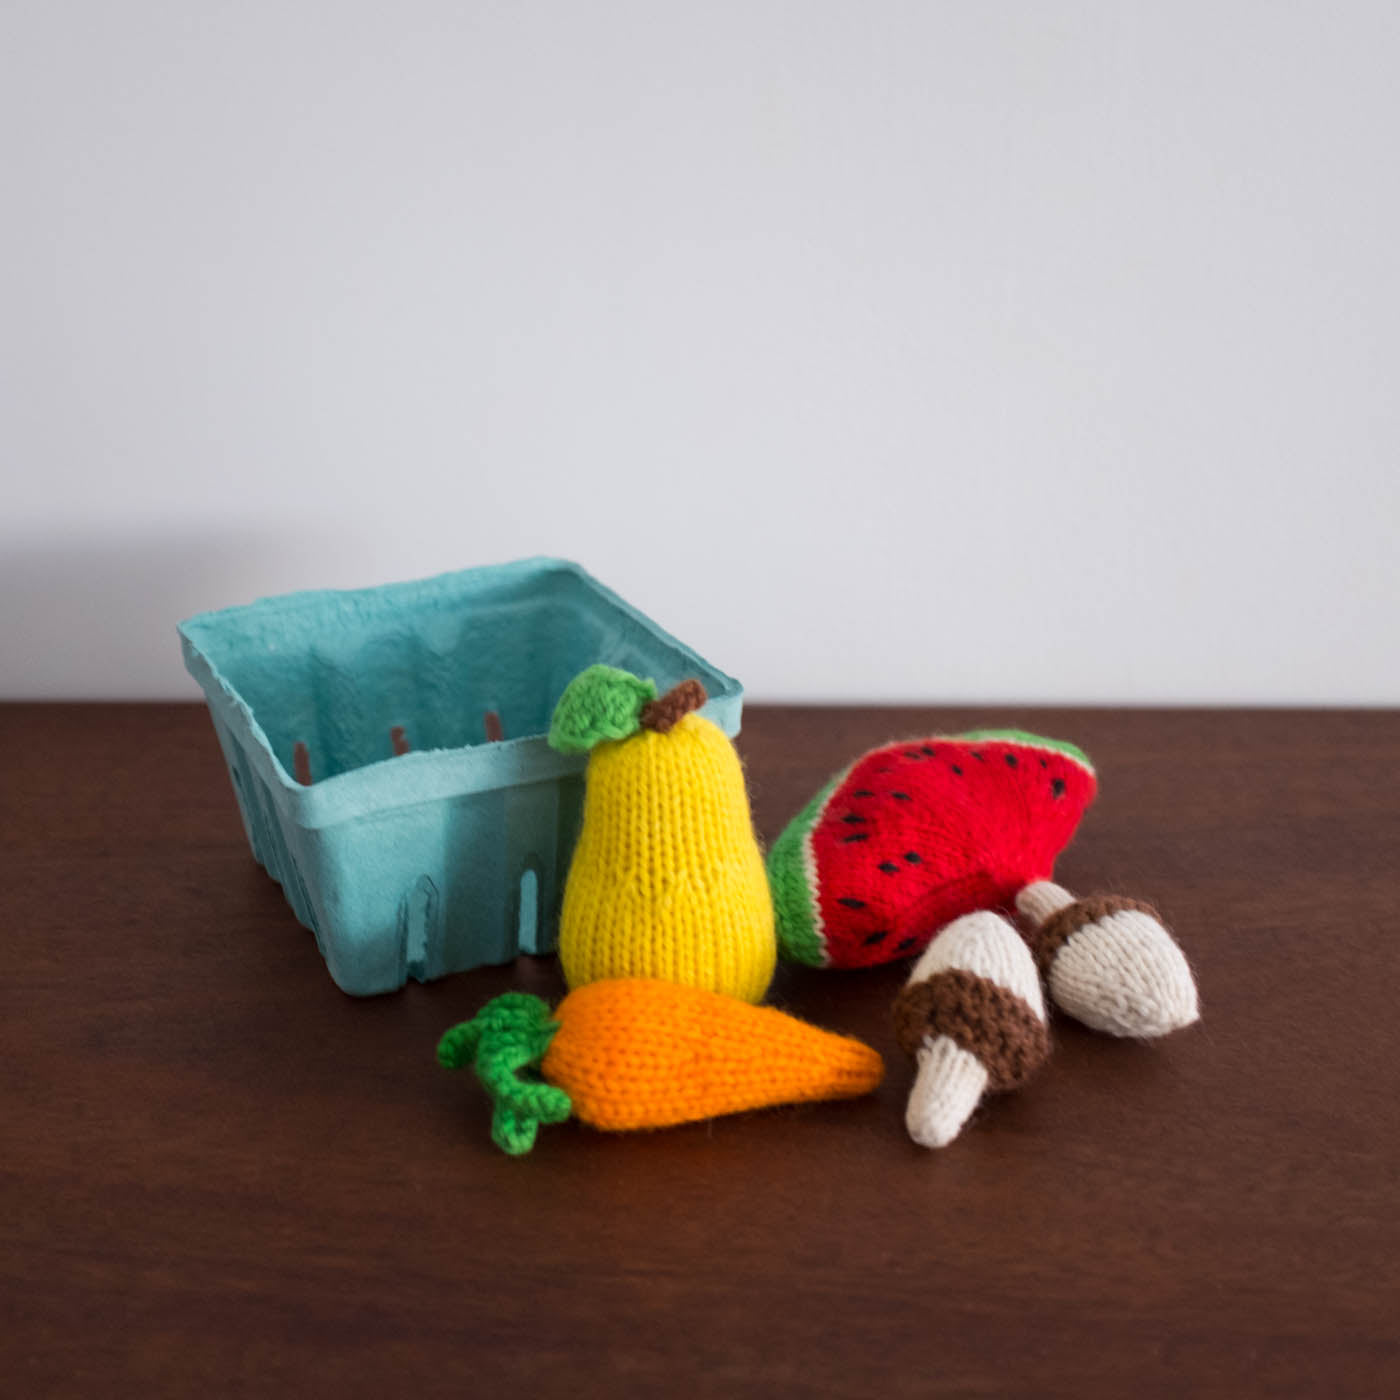 Knitted Play Foods: Watermelon, Pear, Mushroom and Carrot